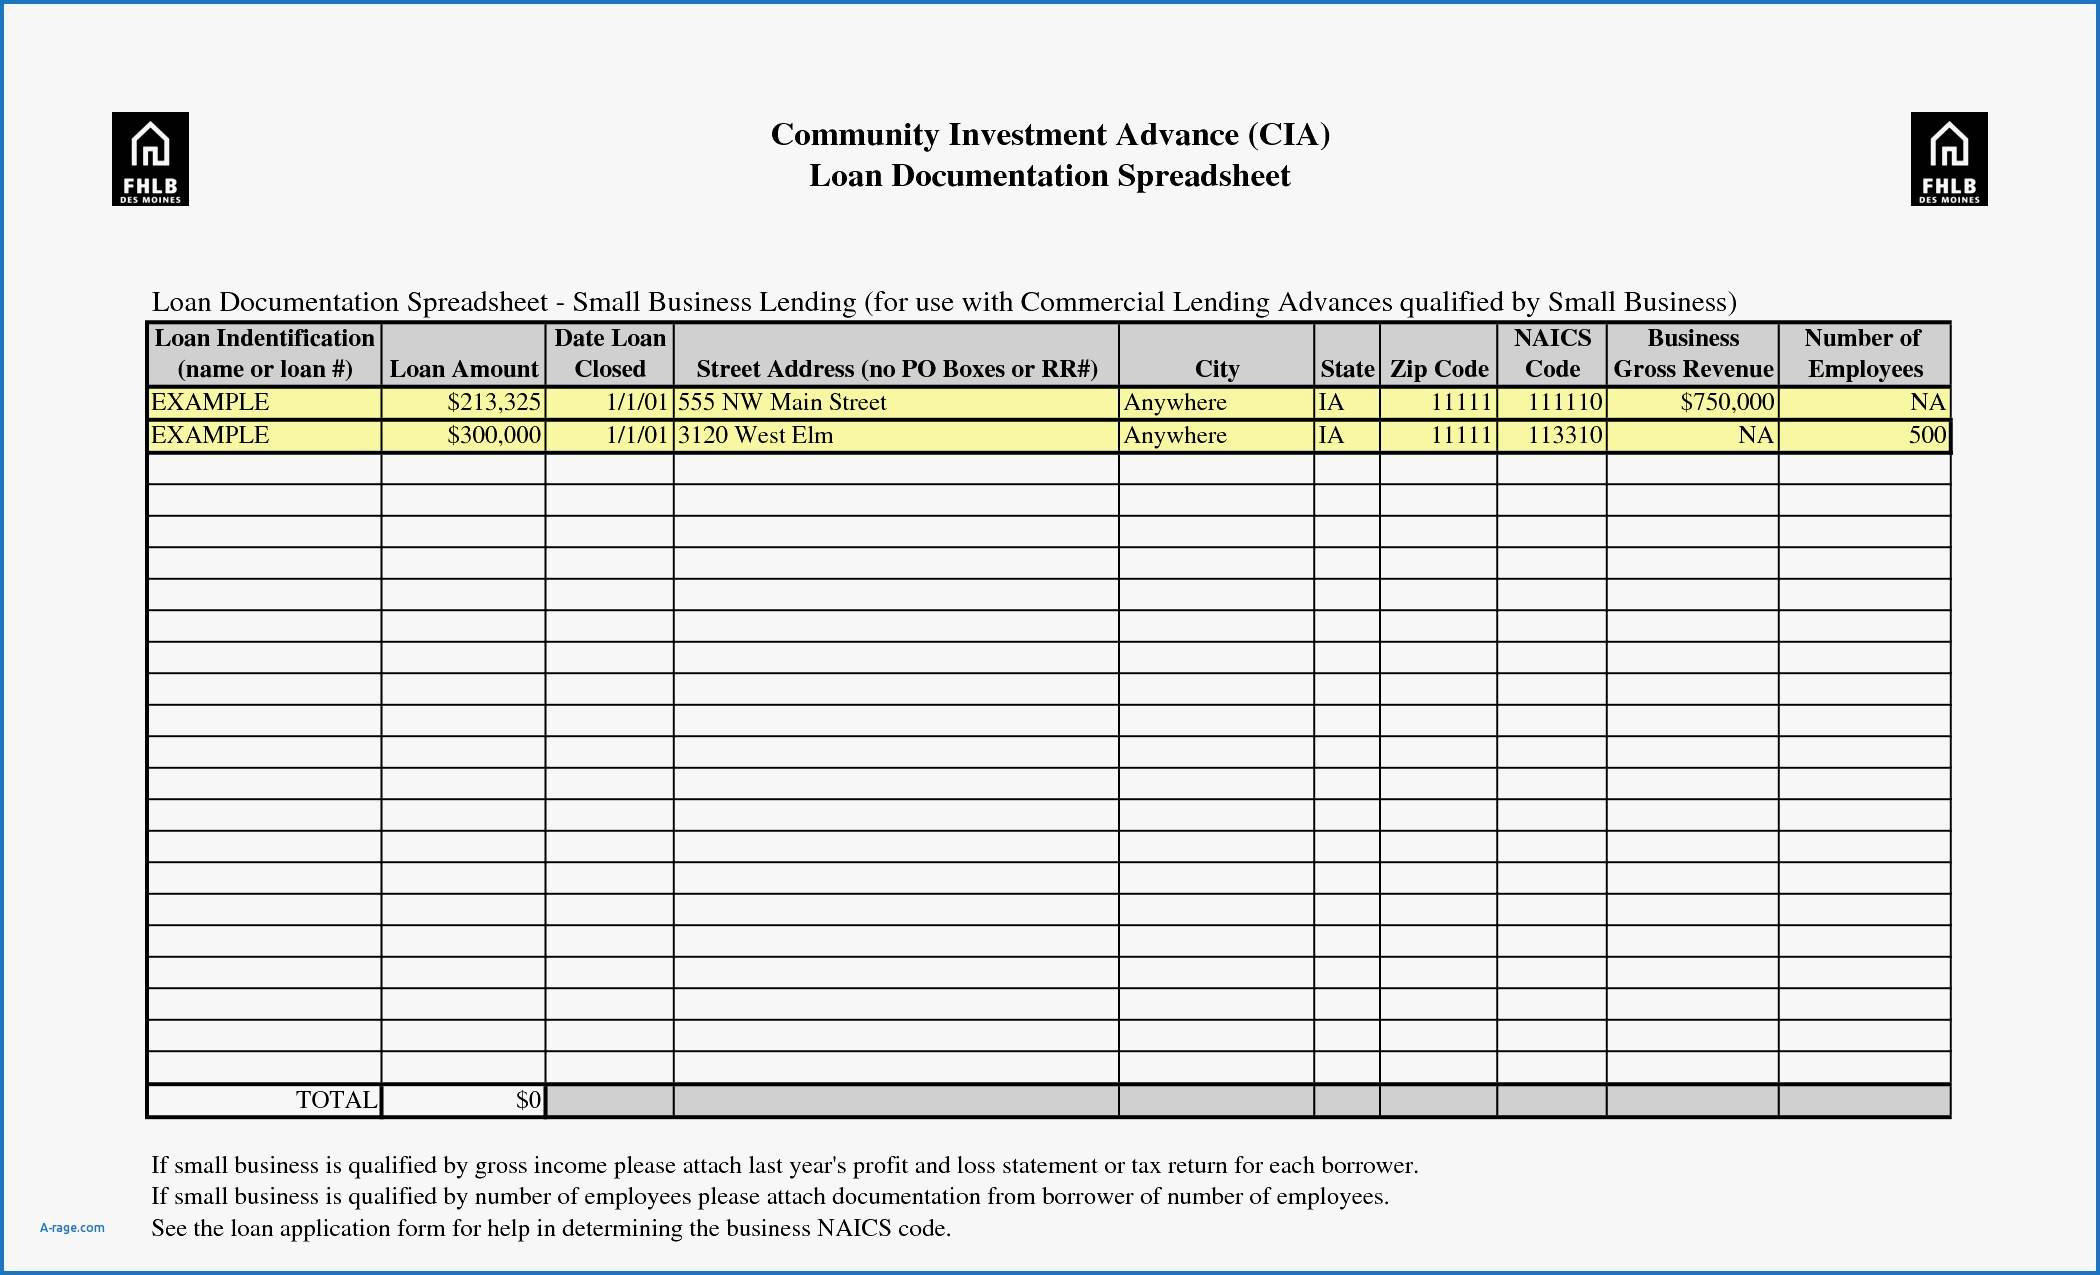 Business Expense Spreadsheet For Taxes regarding Example Of Spreadsheet For Taxes Businessense Inspirationalenses And